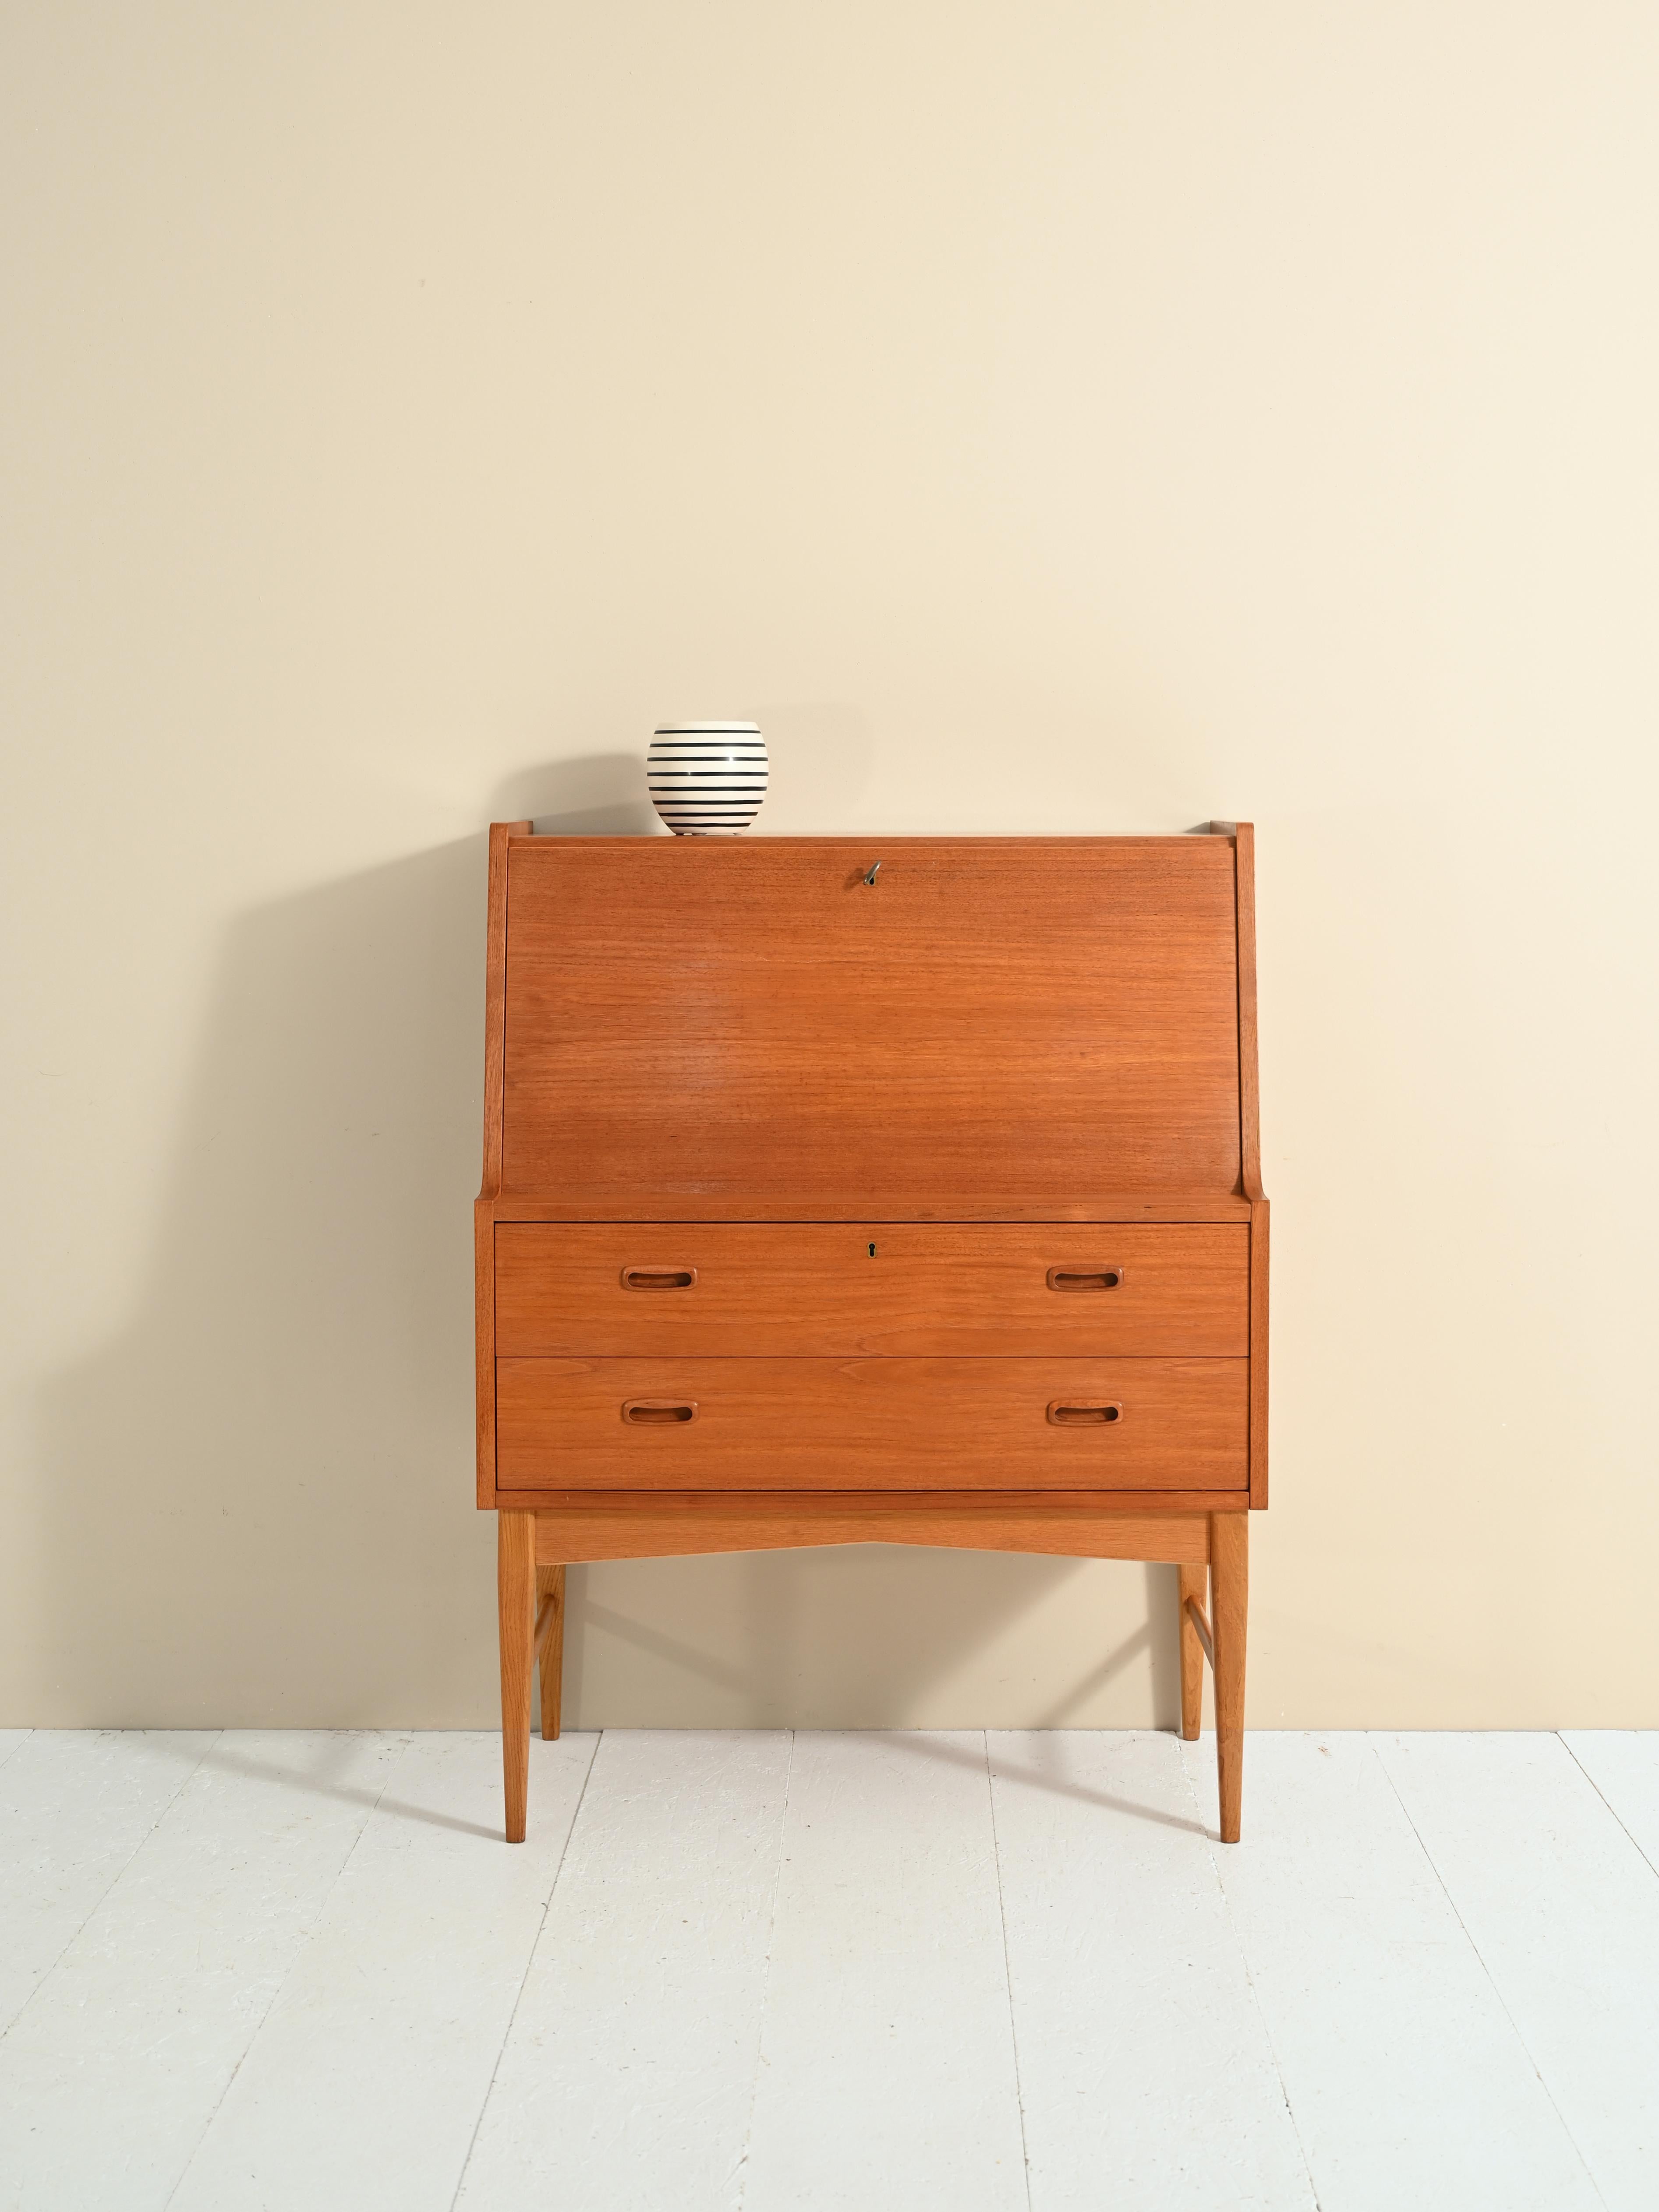 Teak cabinet with drawers and flap. 

The front can be opened if needed and become a convenient desk. Inside are shelves, a drawer and a mirror hidden behind a door. 

At the bottom of the cabinet are two large drawers with a carved wooden